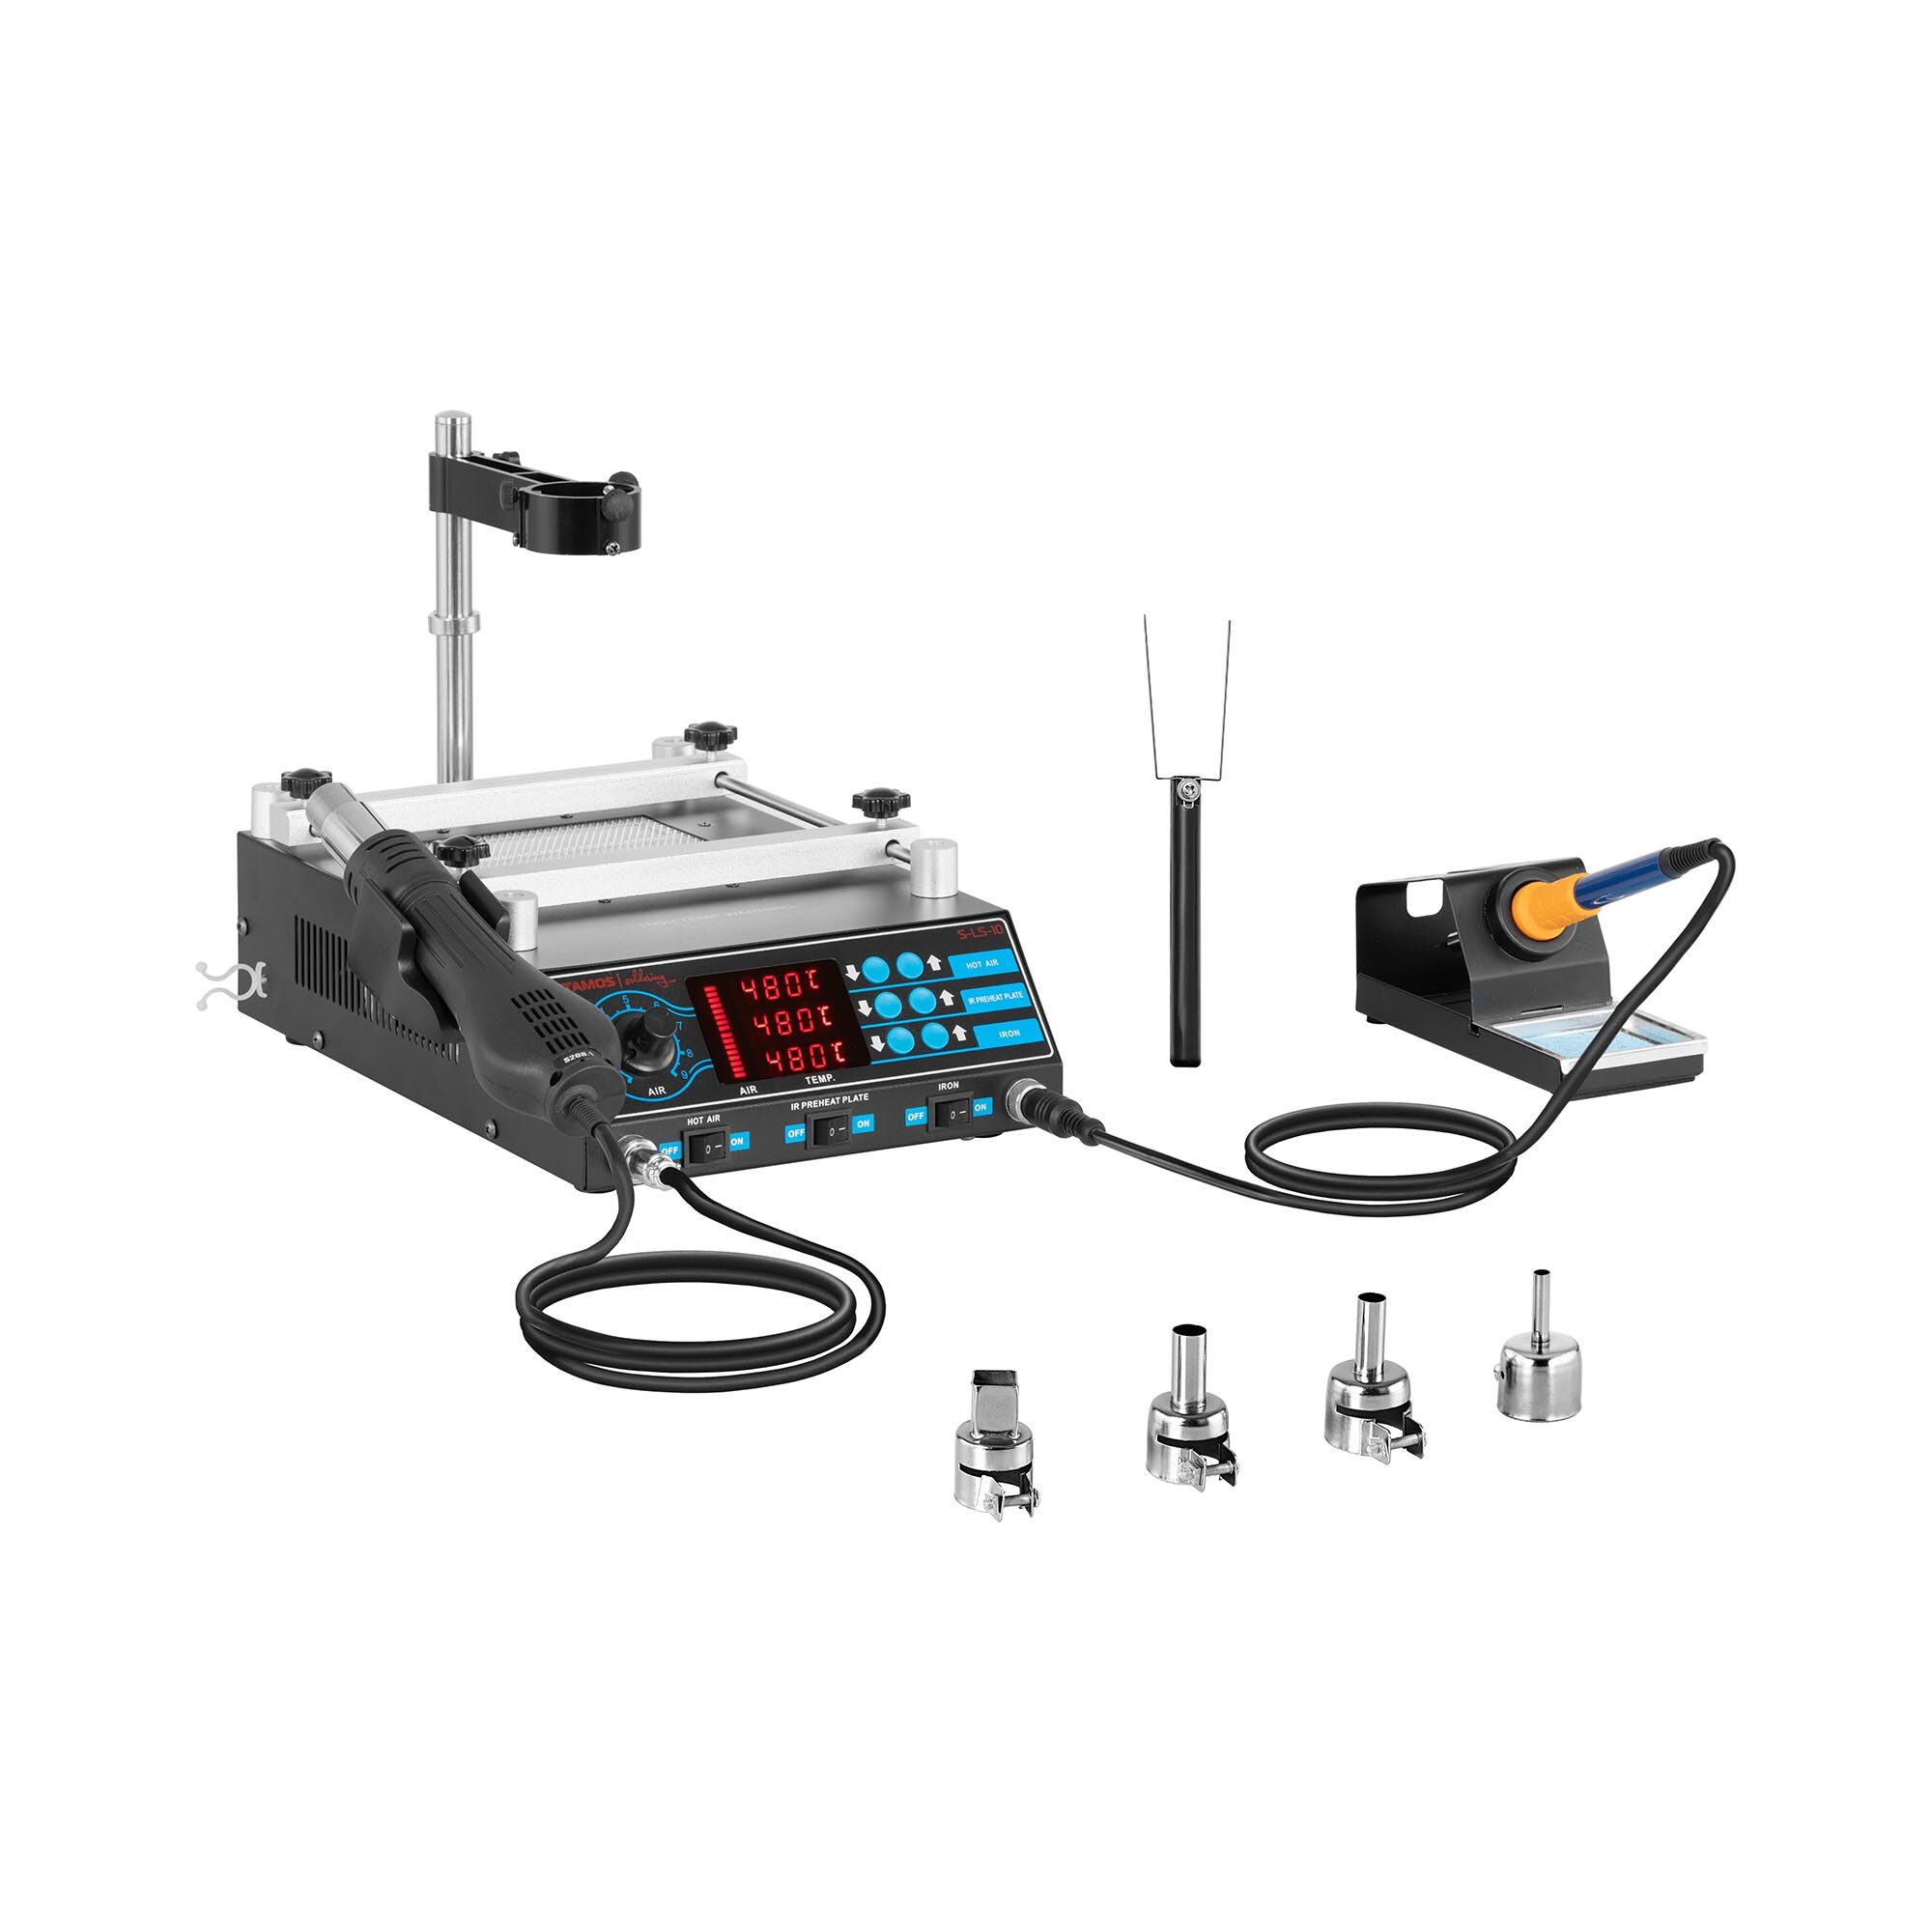 Stamos Soldering Soldering Station with Pre-Heater and 2 Racks – Basic